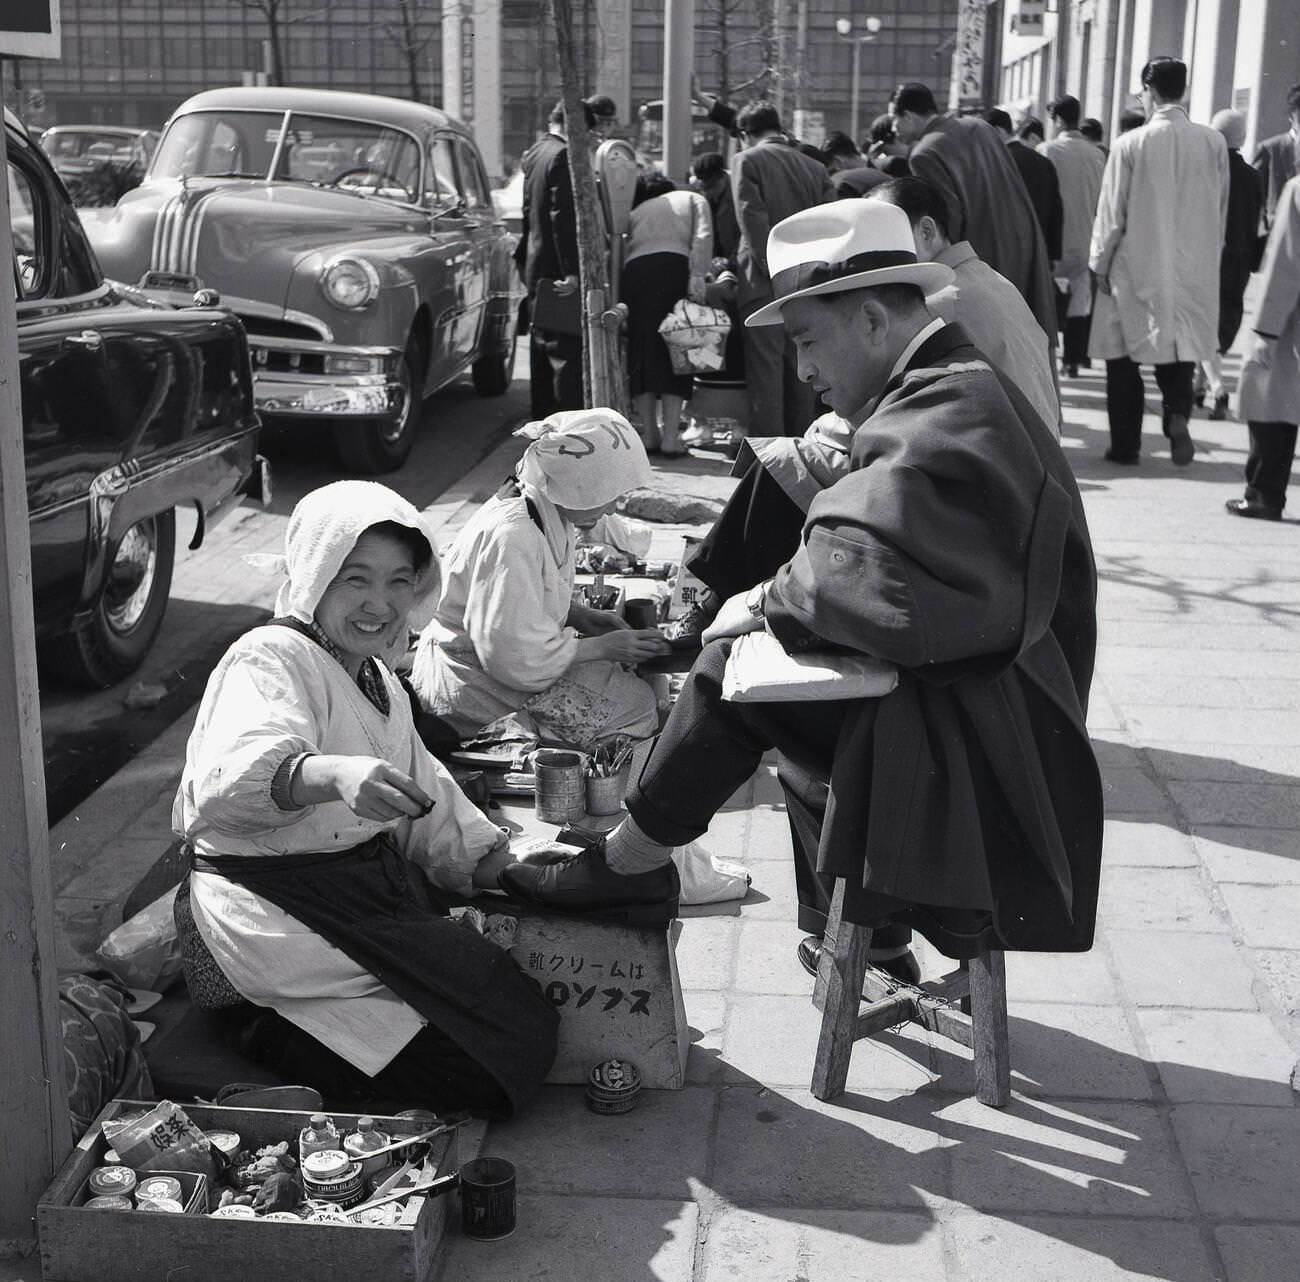 Japanese business men sitting on stools getting a shoeshine outside, 1950s.